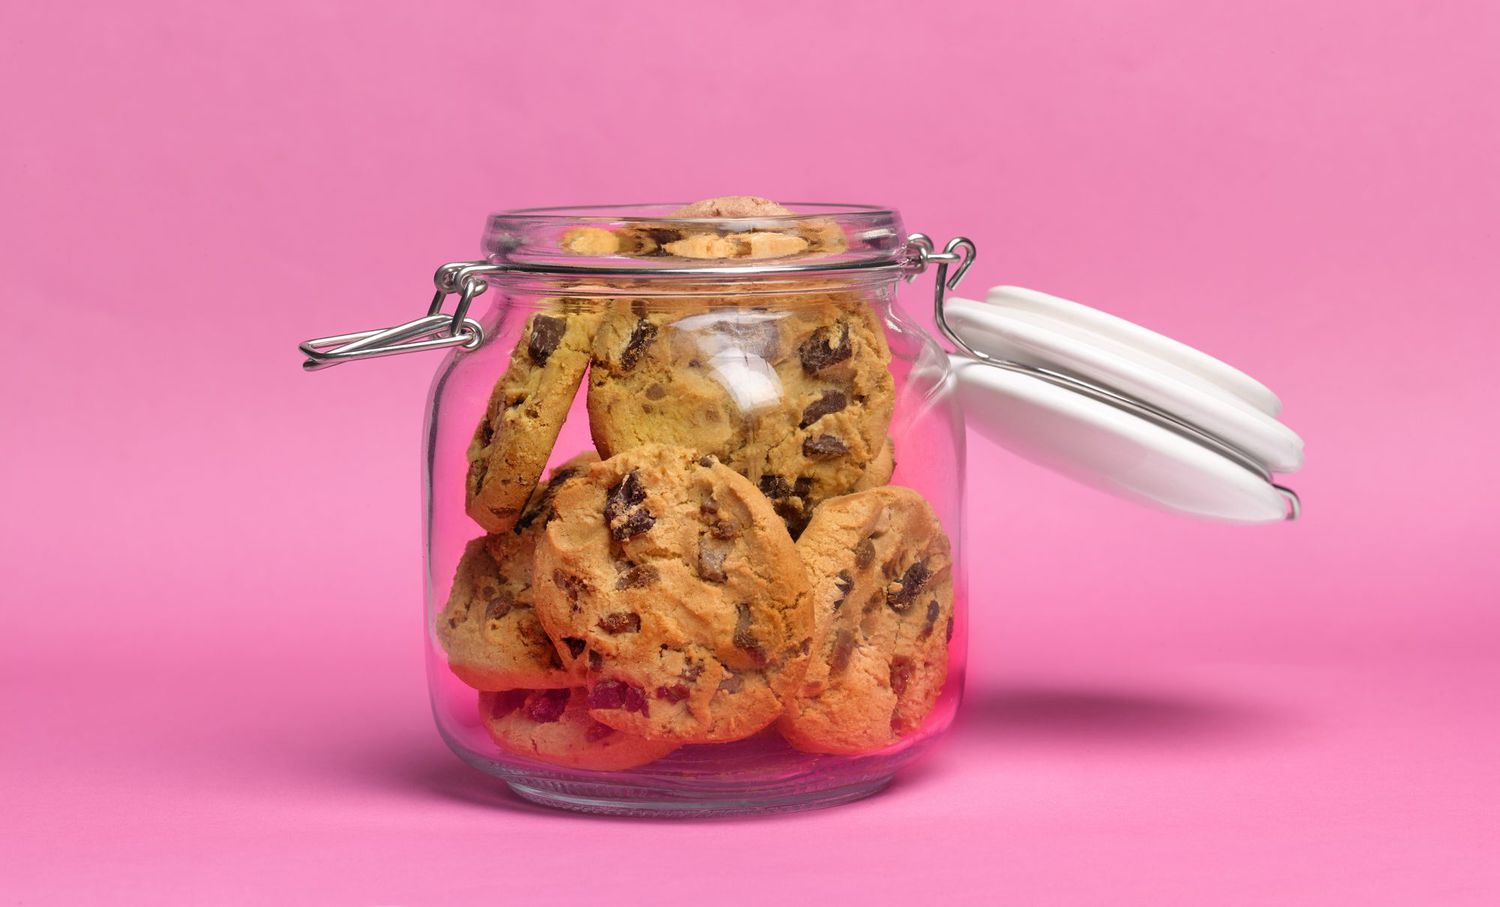 How To Store Cookies To Keep Them Soft